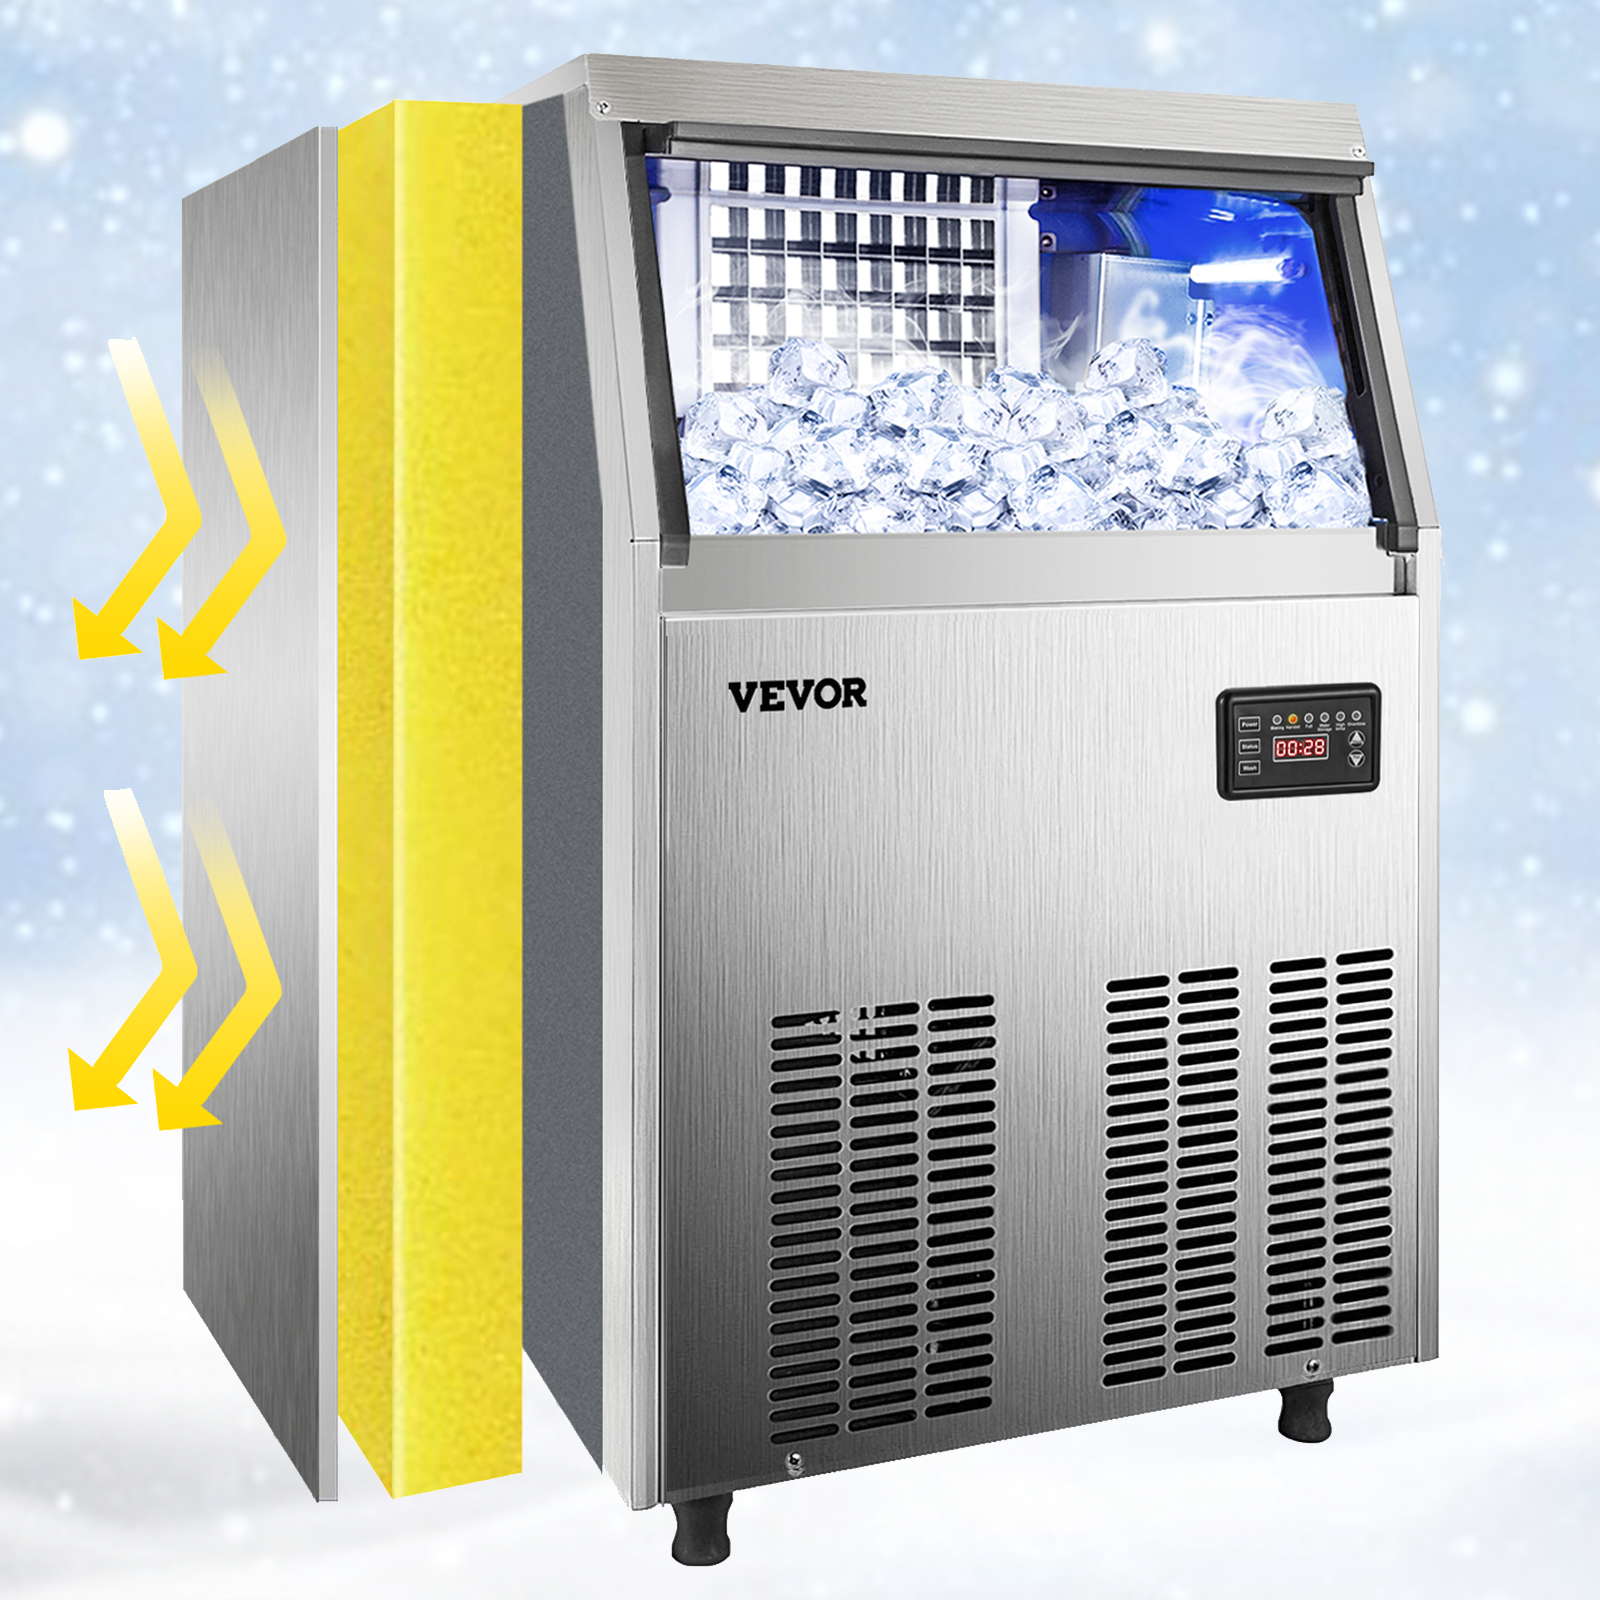 VEVOR 80 - 90 lb. 24 Hour Commercial Ice Maker with 19 lb. Storage Bin  Freestanding Ice Machine in Silver ZBJ40KGSYPPSB0001V1 - The Home Depot